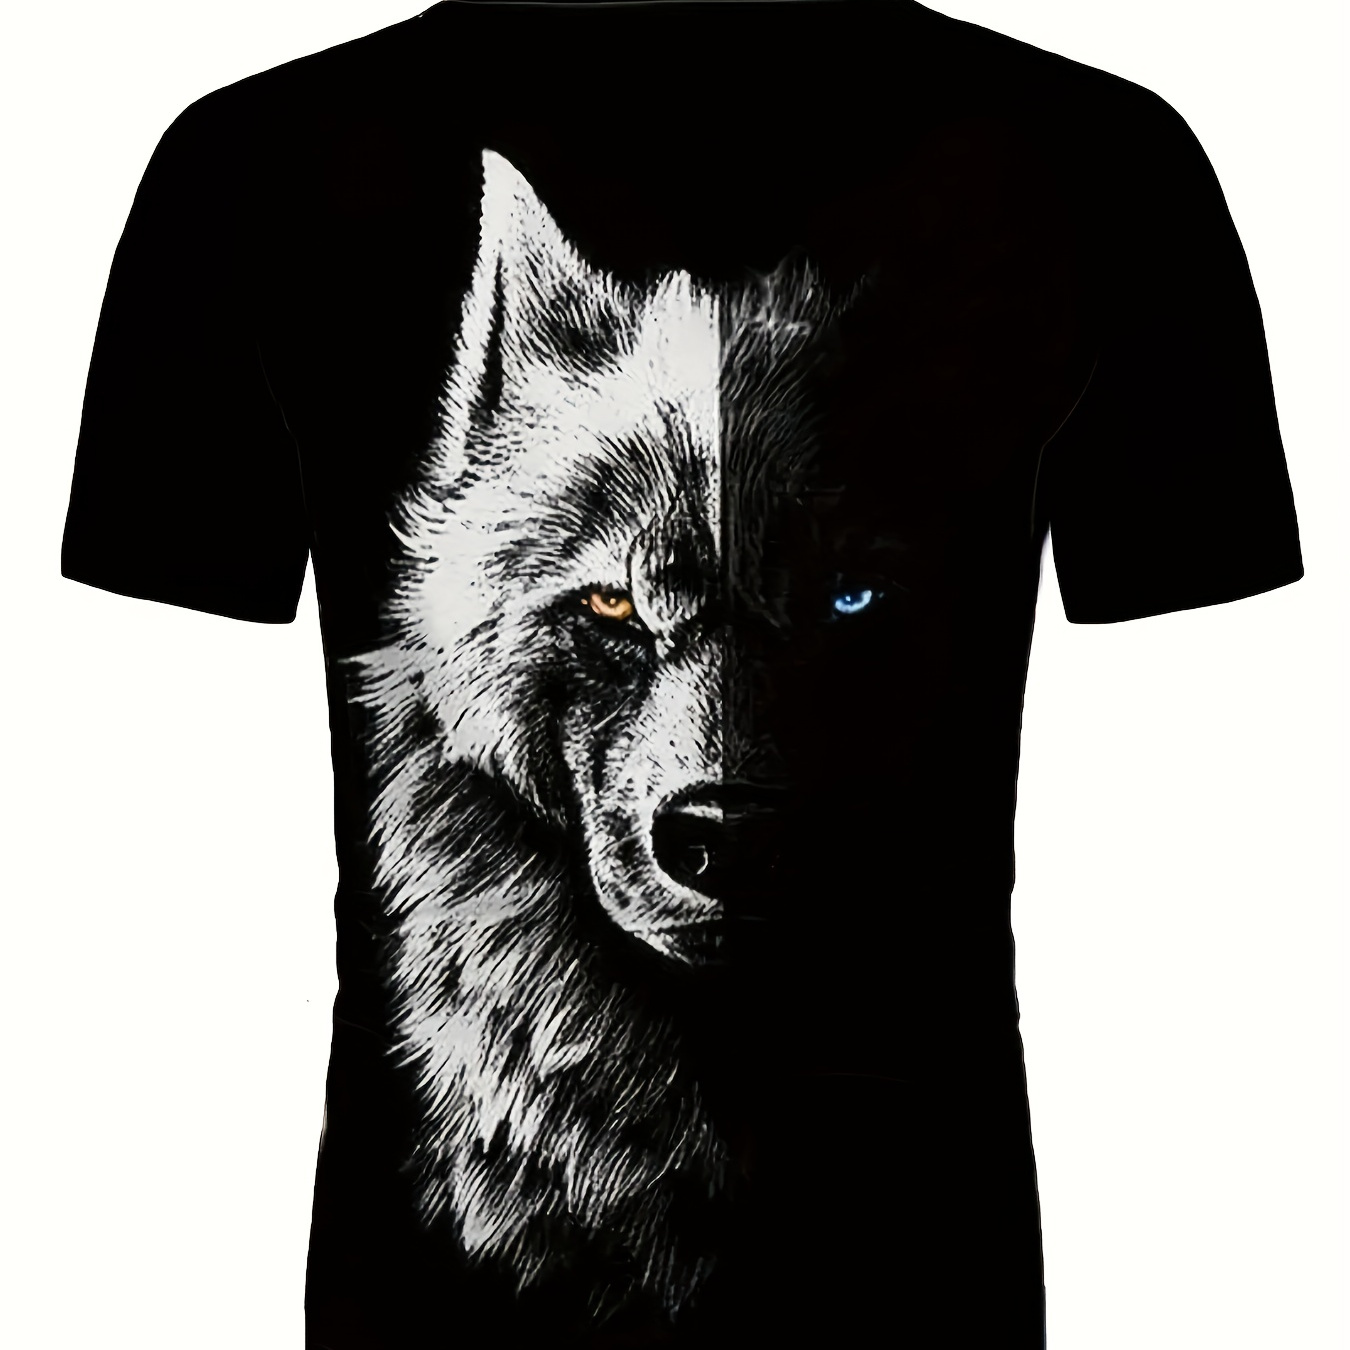 

Wolf Print, Men's Graphic Design Crew Neck Active T-shirt, Casual Comfy Tees Tshirts For Summer, Men's Clothing Tops For Daily Gym Workout Running